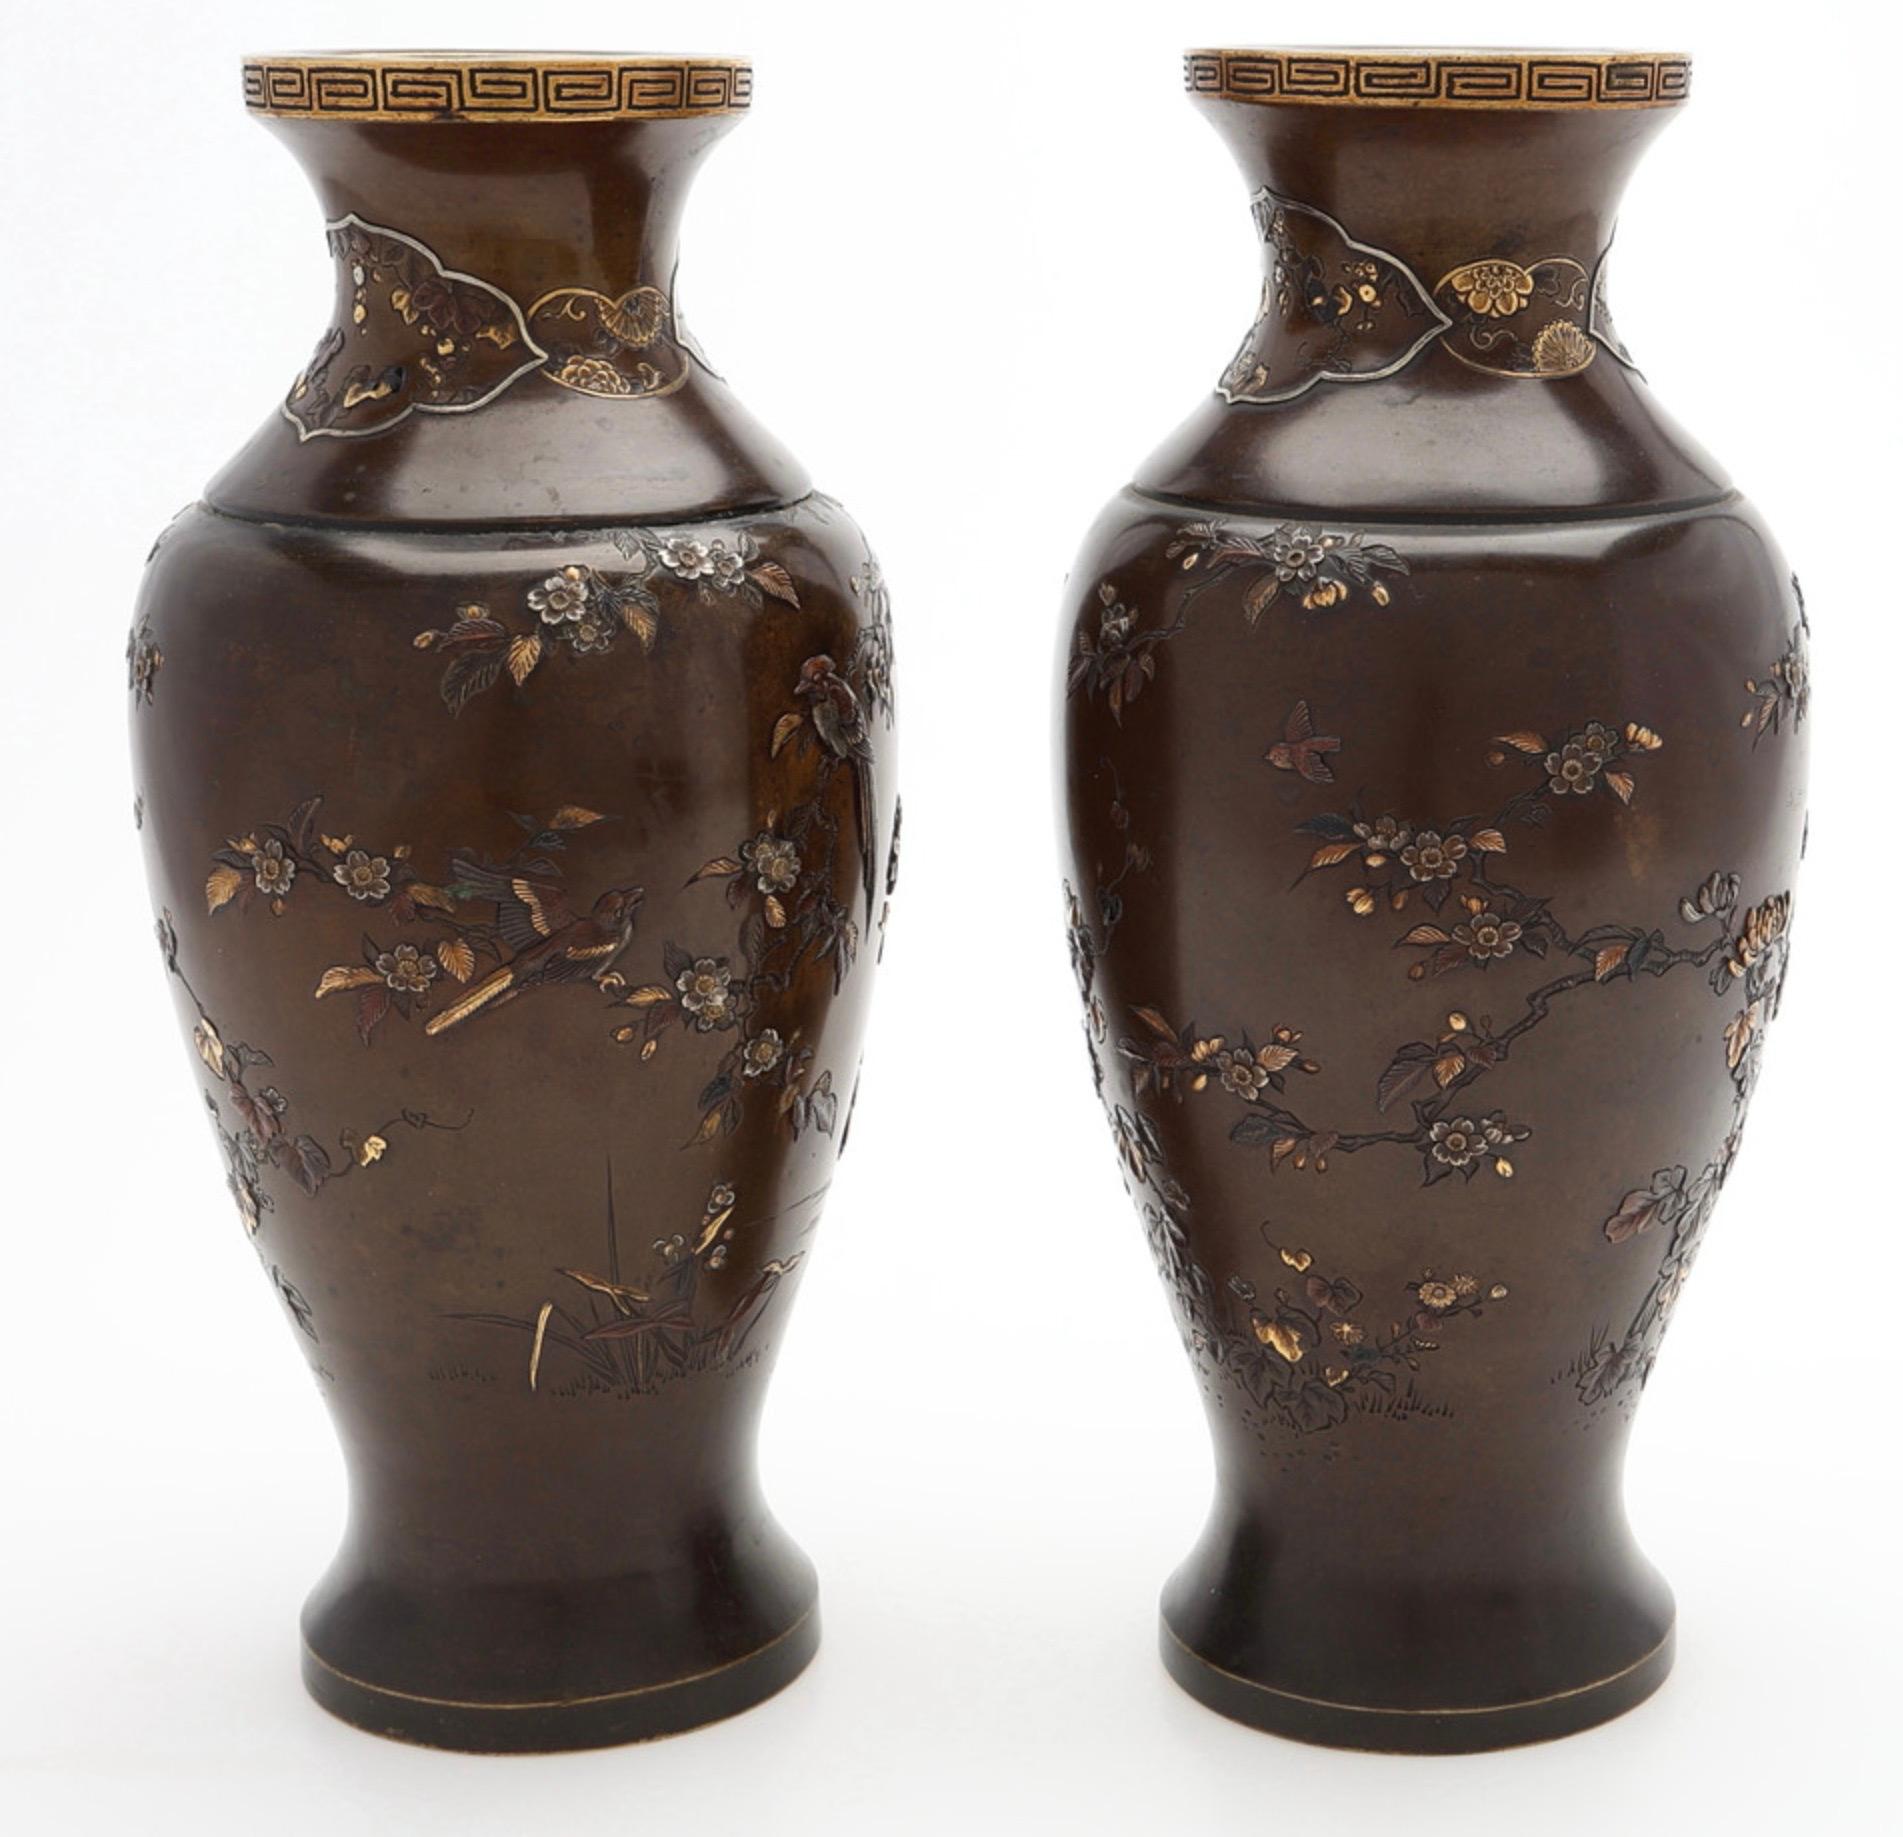 Pair of Japanese urns. 19th c. Meiji period. Signed. For Sale 3